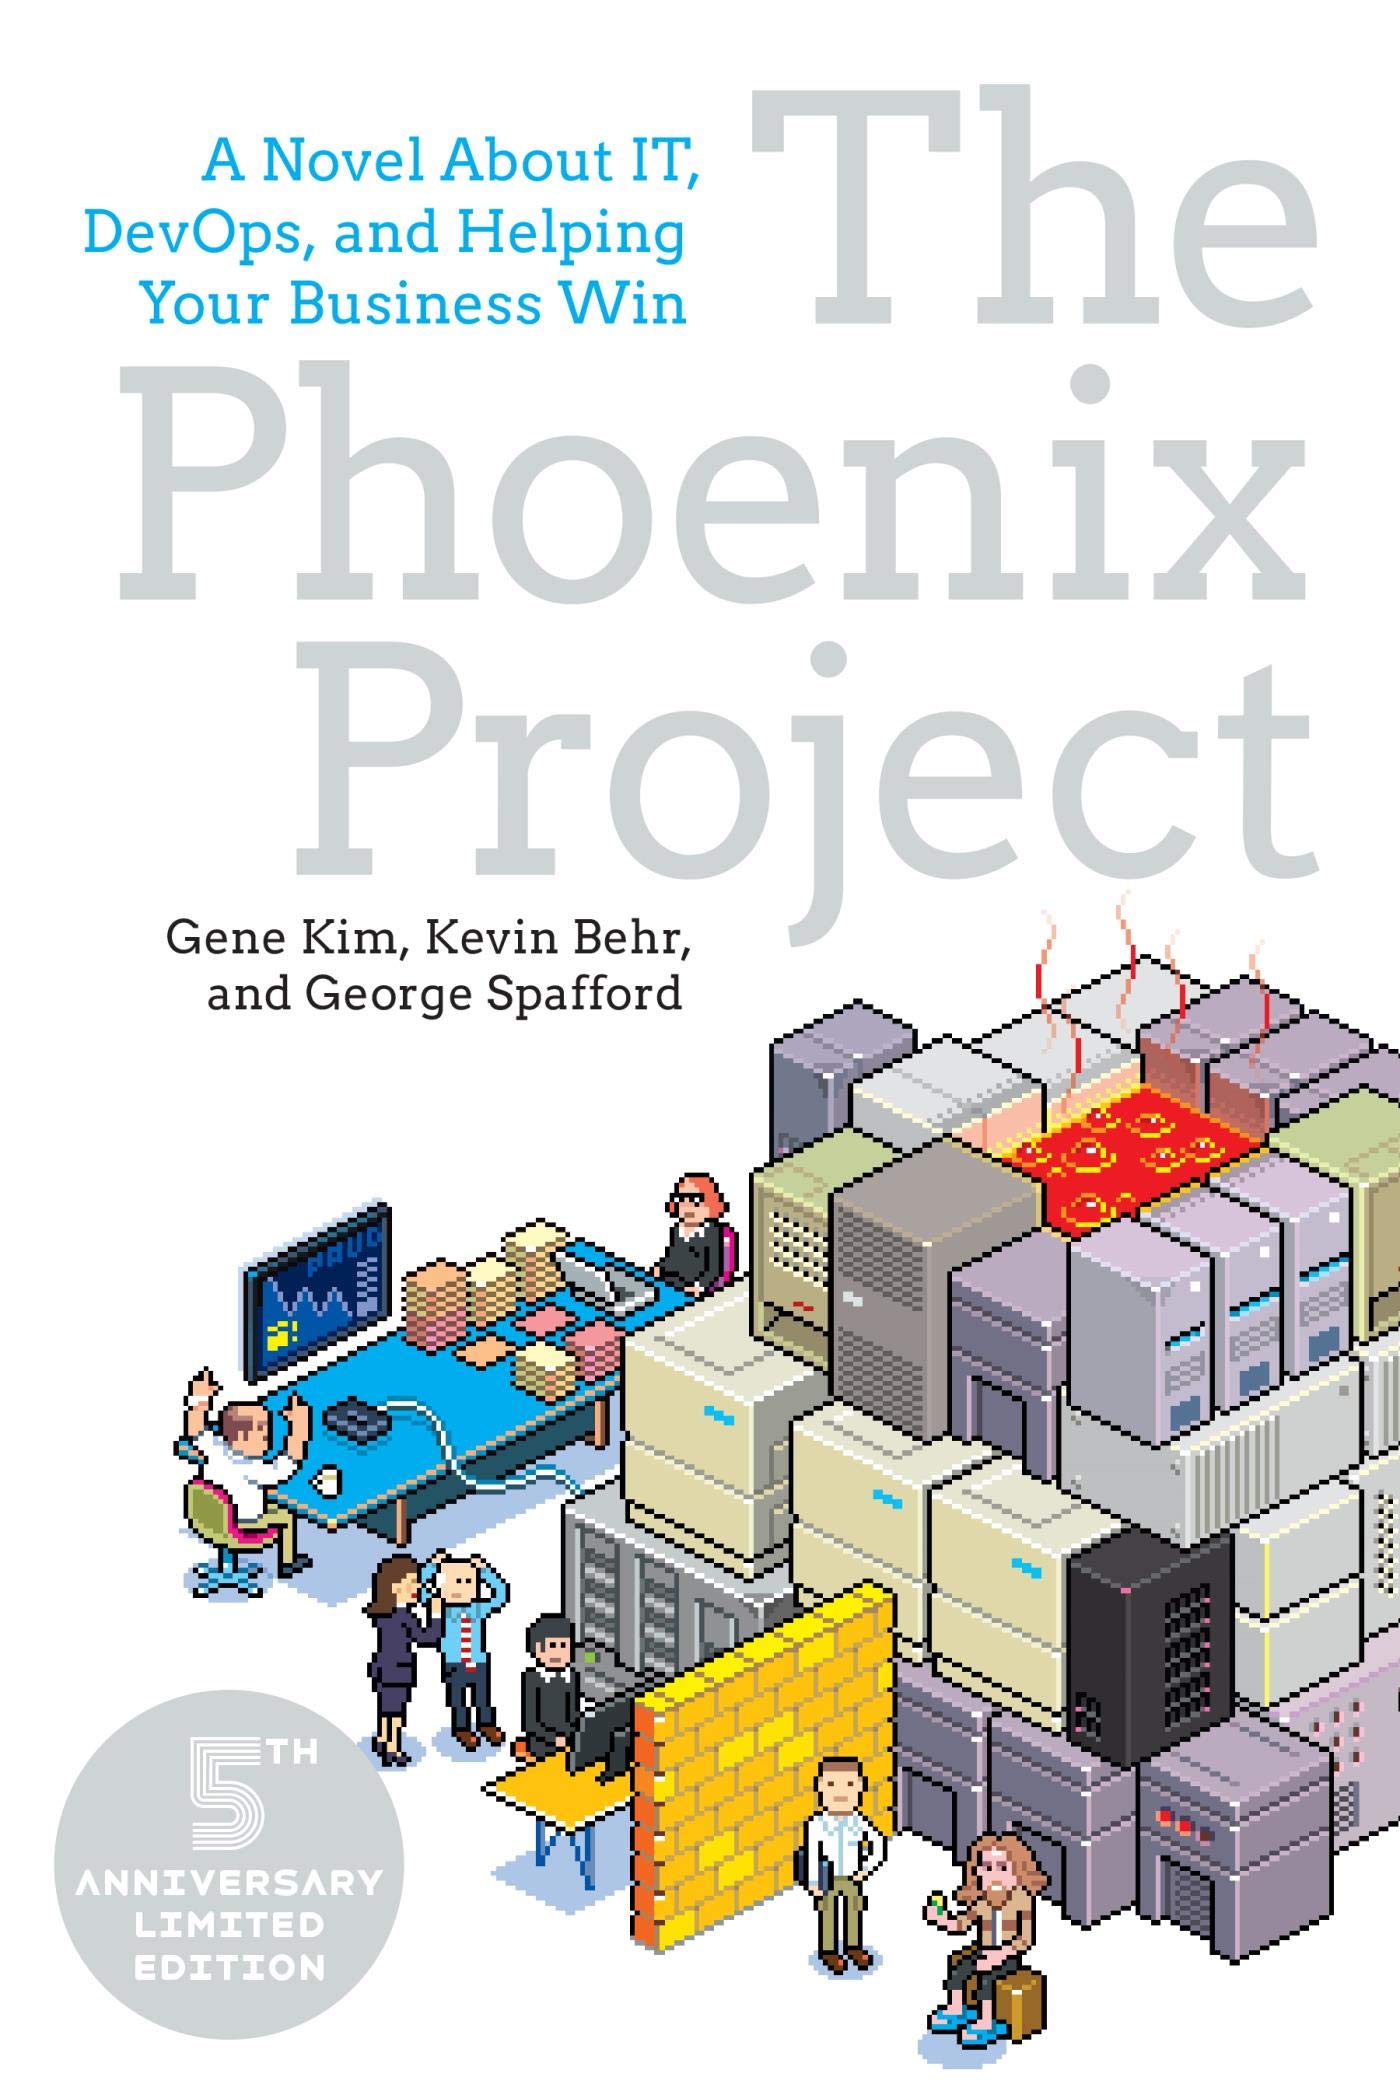 The cover of The Phoenix Project